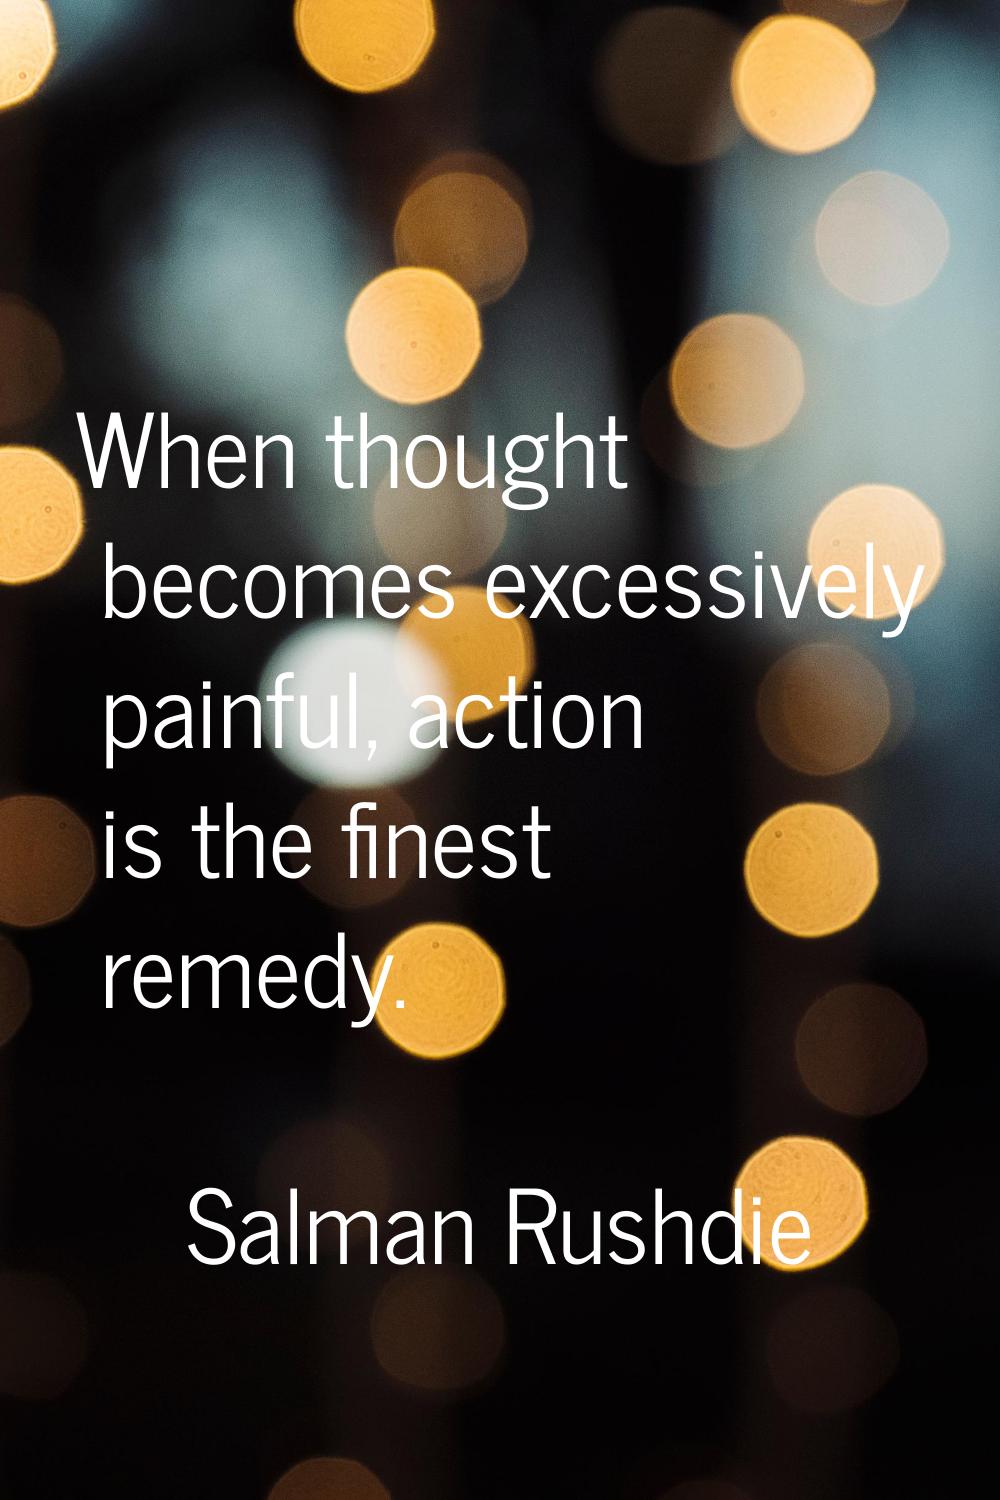 When thought becomes excessively painful, action is the finest remedy.